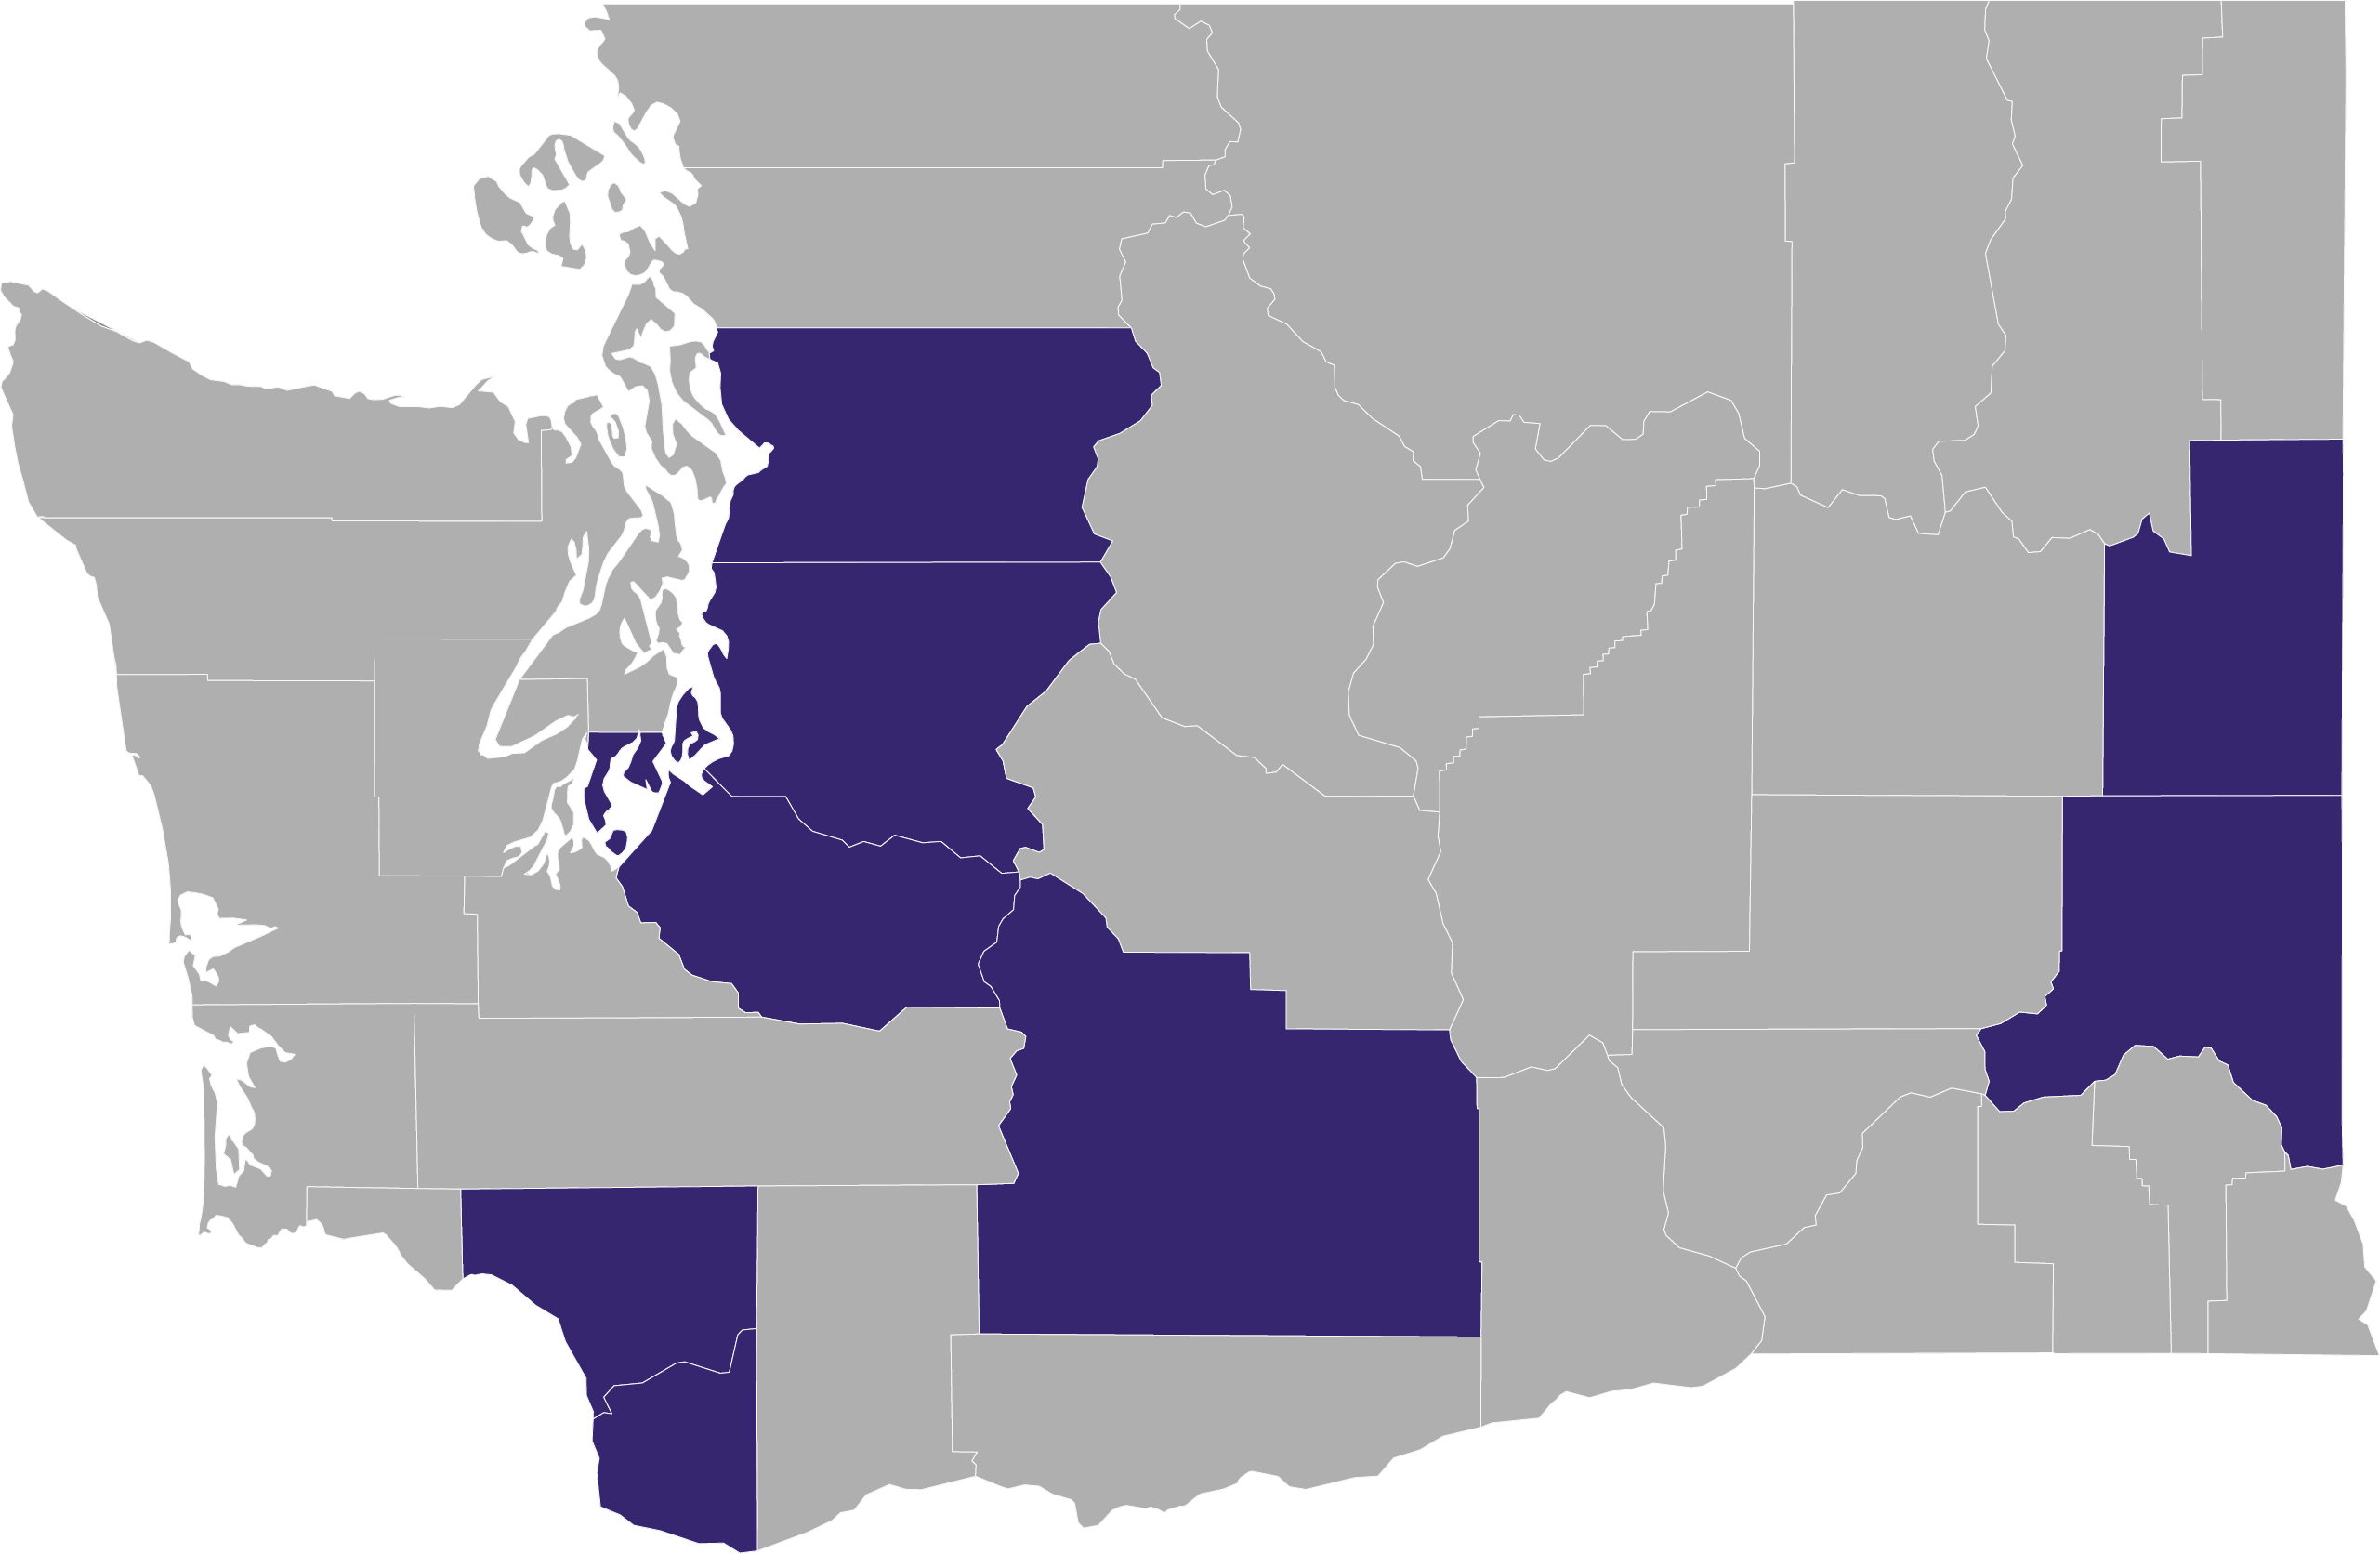 Washington state map with eight counties colored in purple to represent PEARLS.